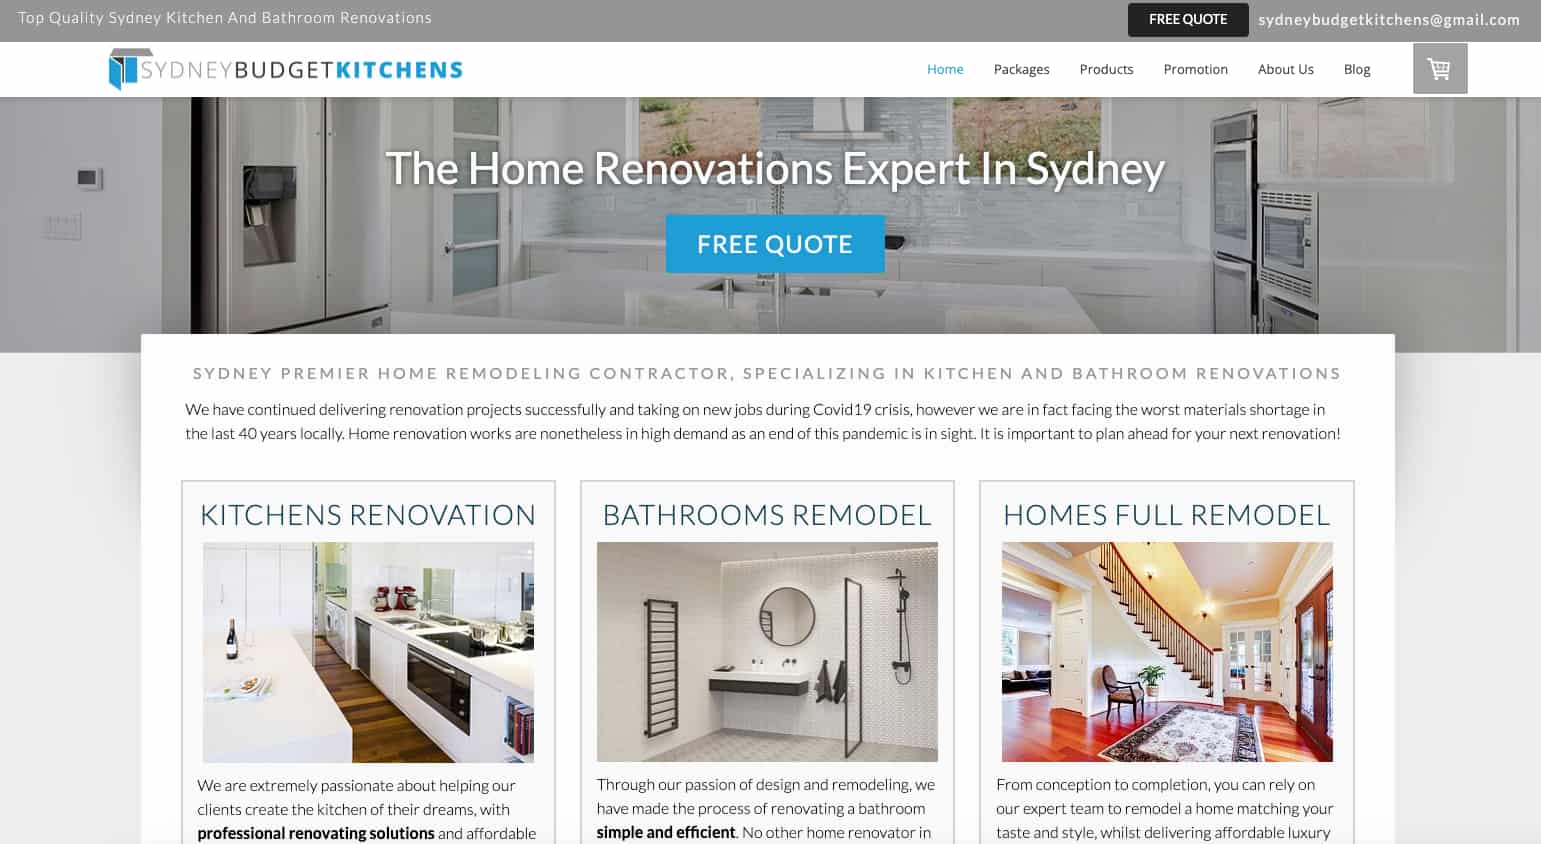 Sydney Budget Kitchens and Bathrooms